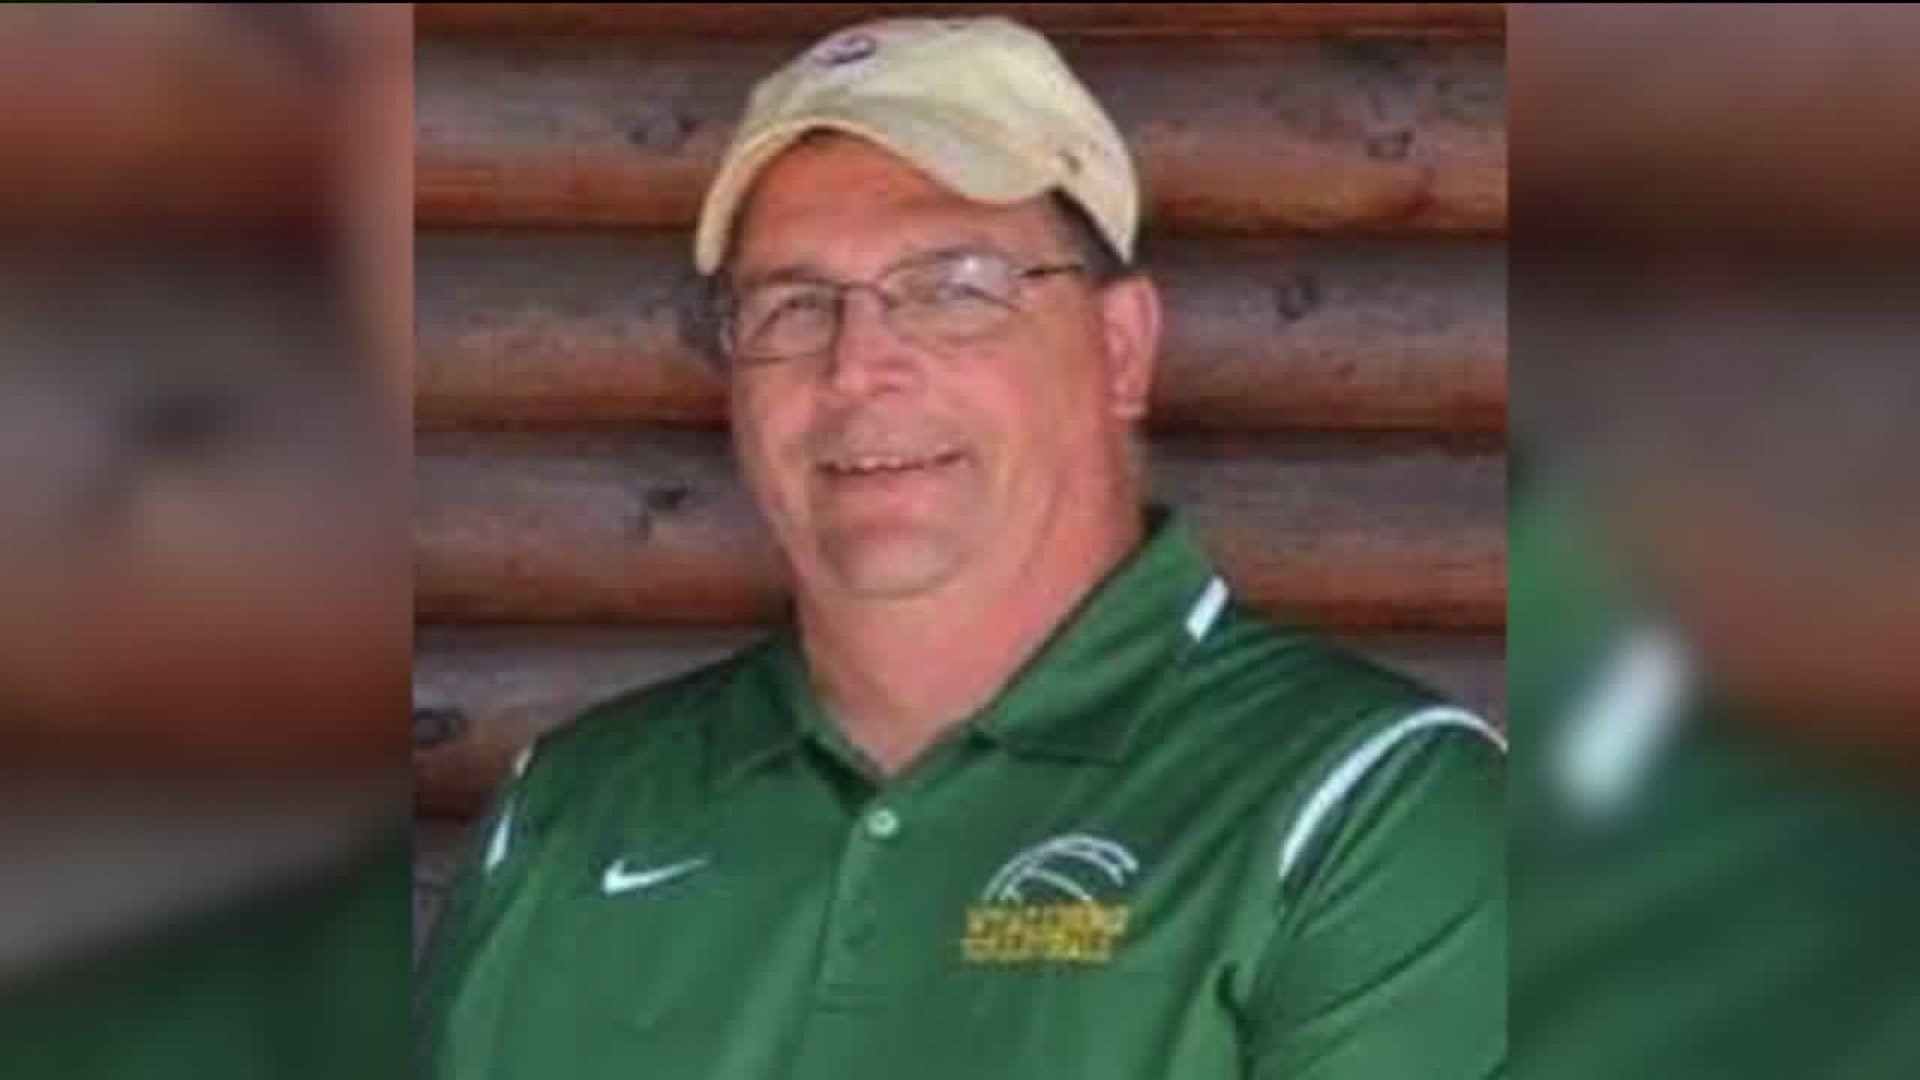 Wyalusing Area Volleyball Players Remember Beloved Coach After Sudden Passing